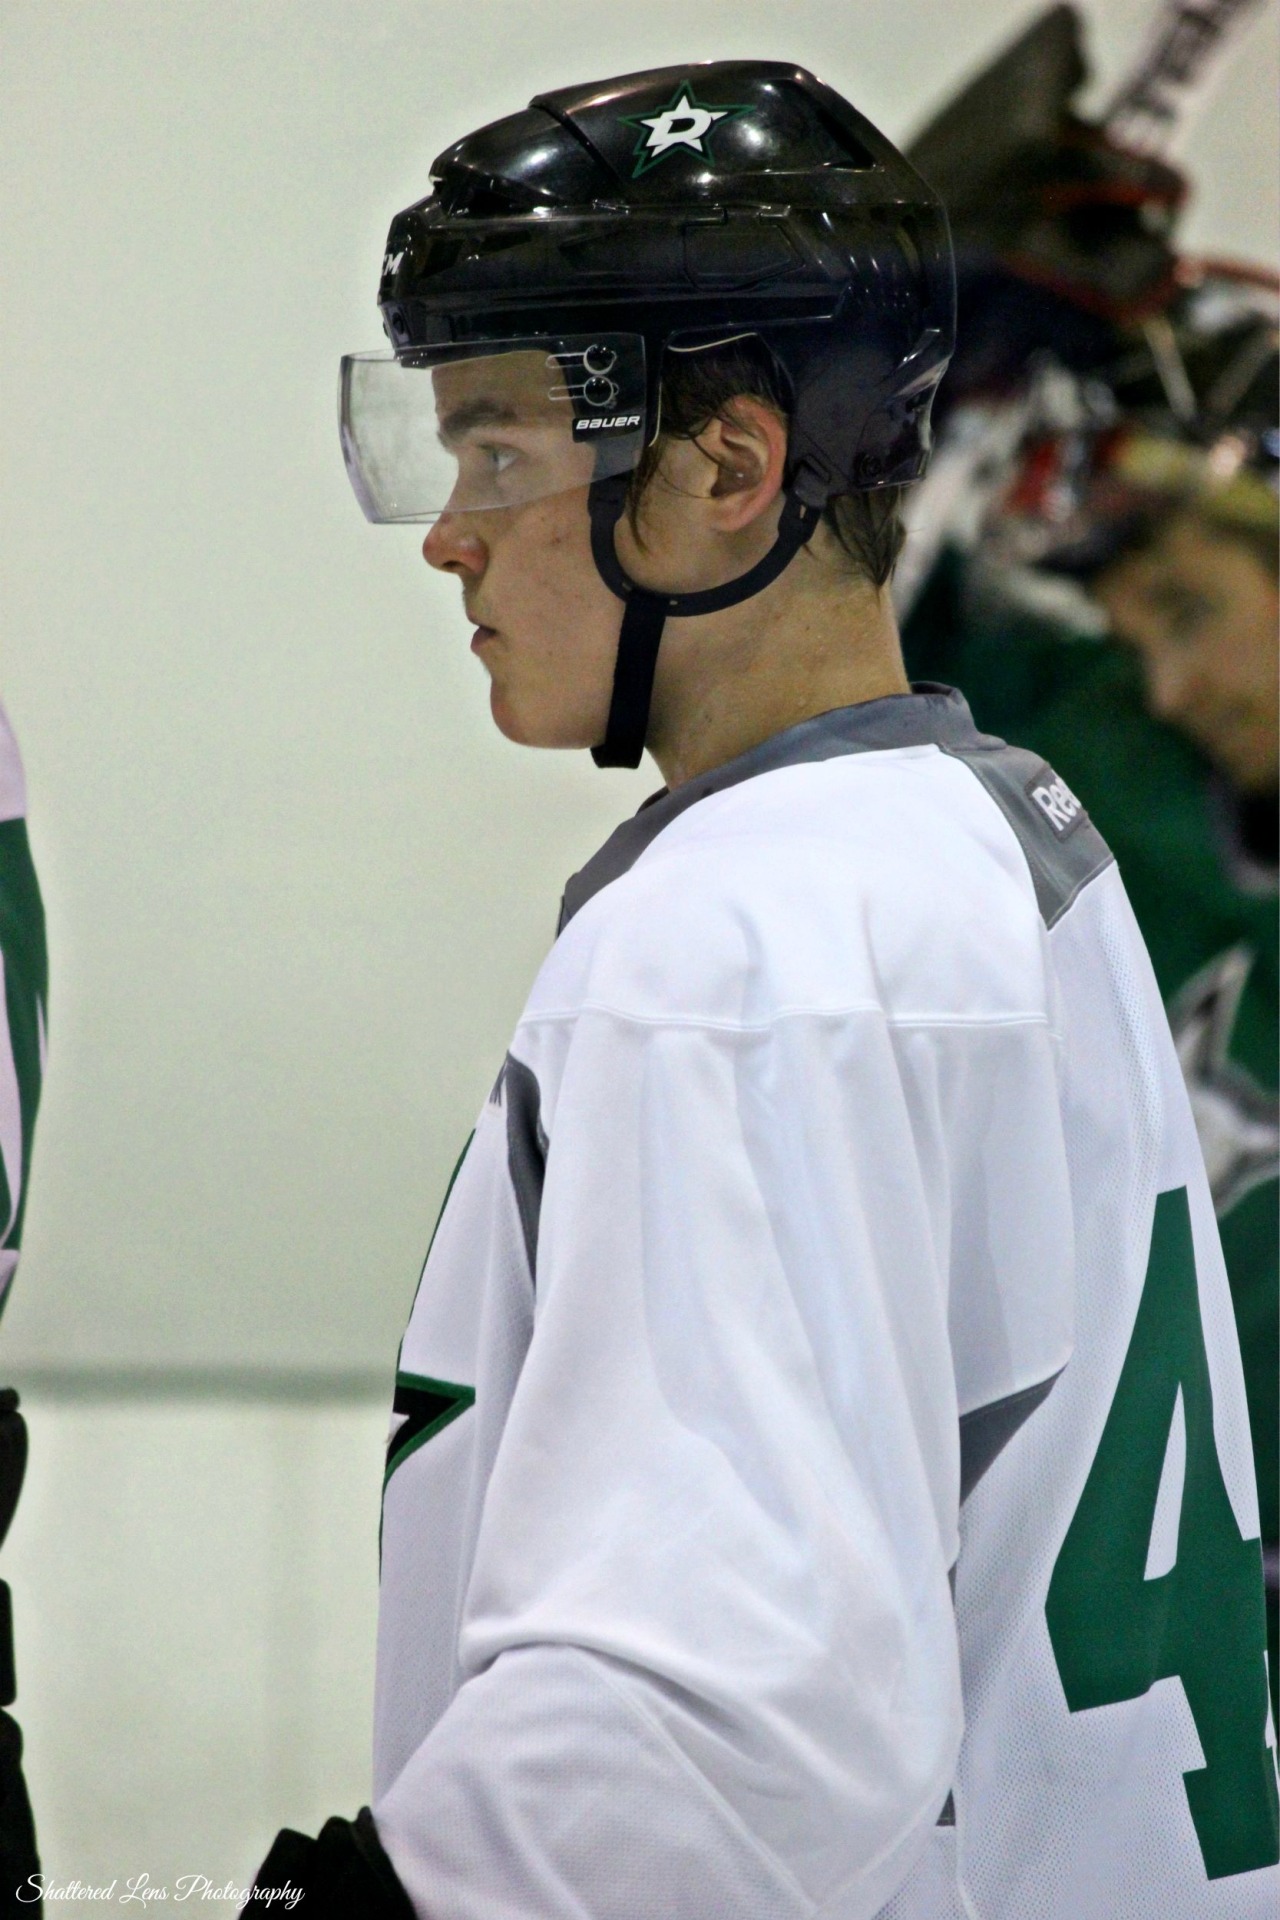 shattered-lens-photography:
“Julius Honka at Dallas Stars Development Camp
Photo by: Shattered Lens Photography
Please do not remove the watermark in the corner. I don’t mind if you use my pictures, but please credit me! I work very hard at what I...